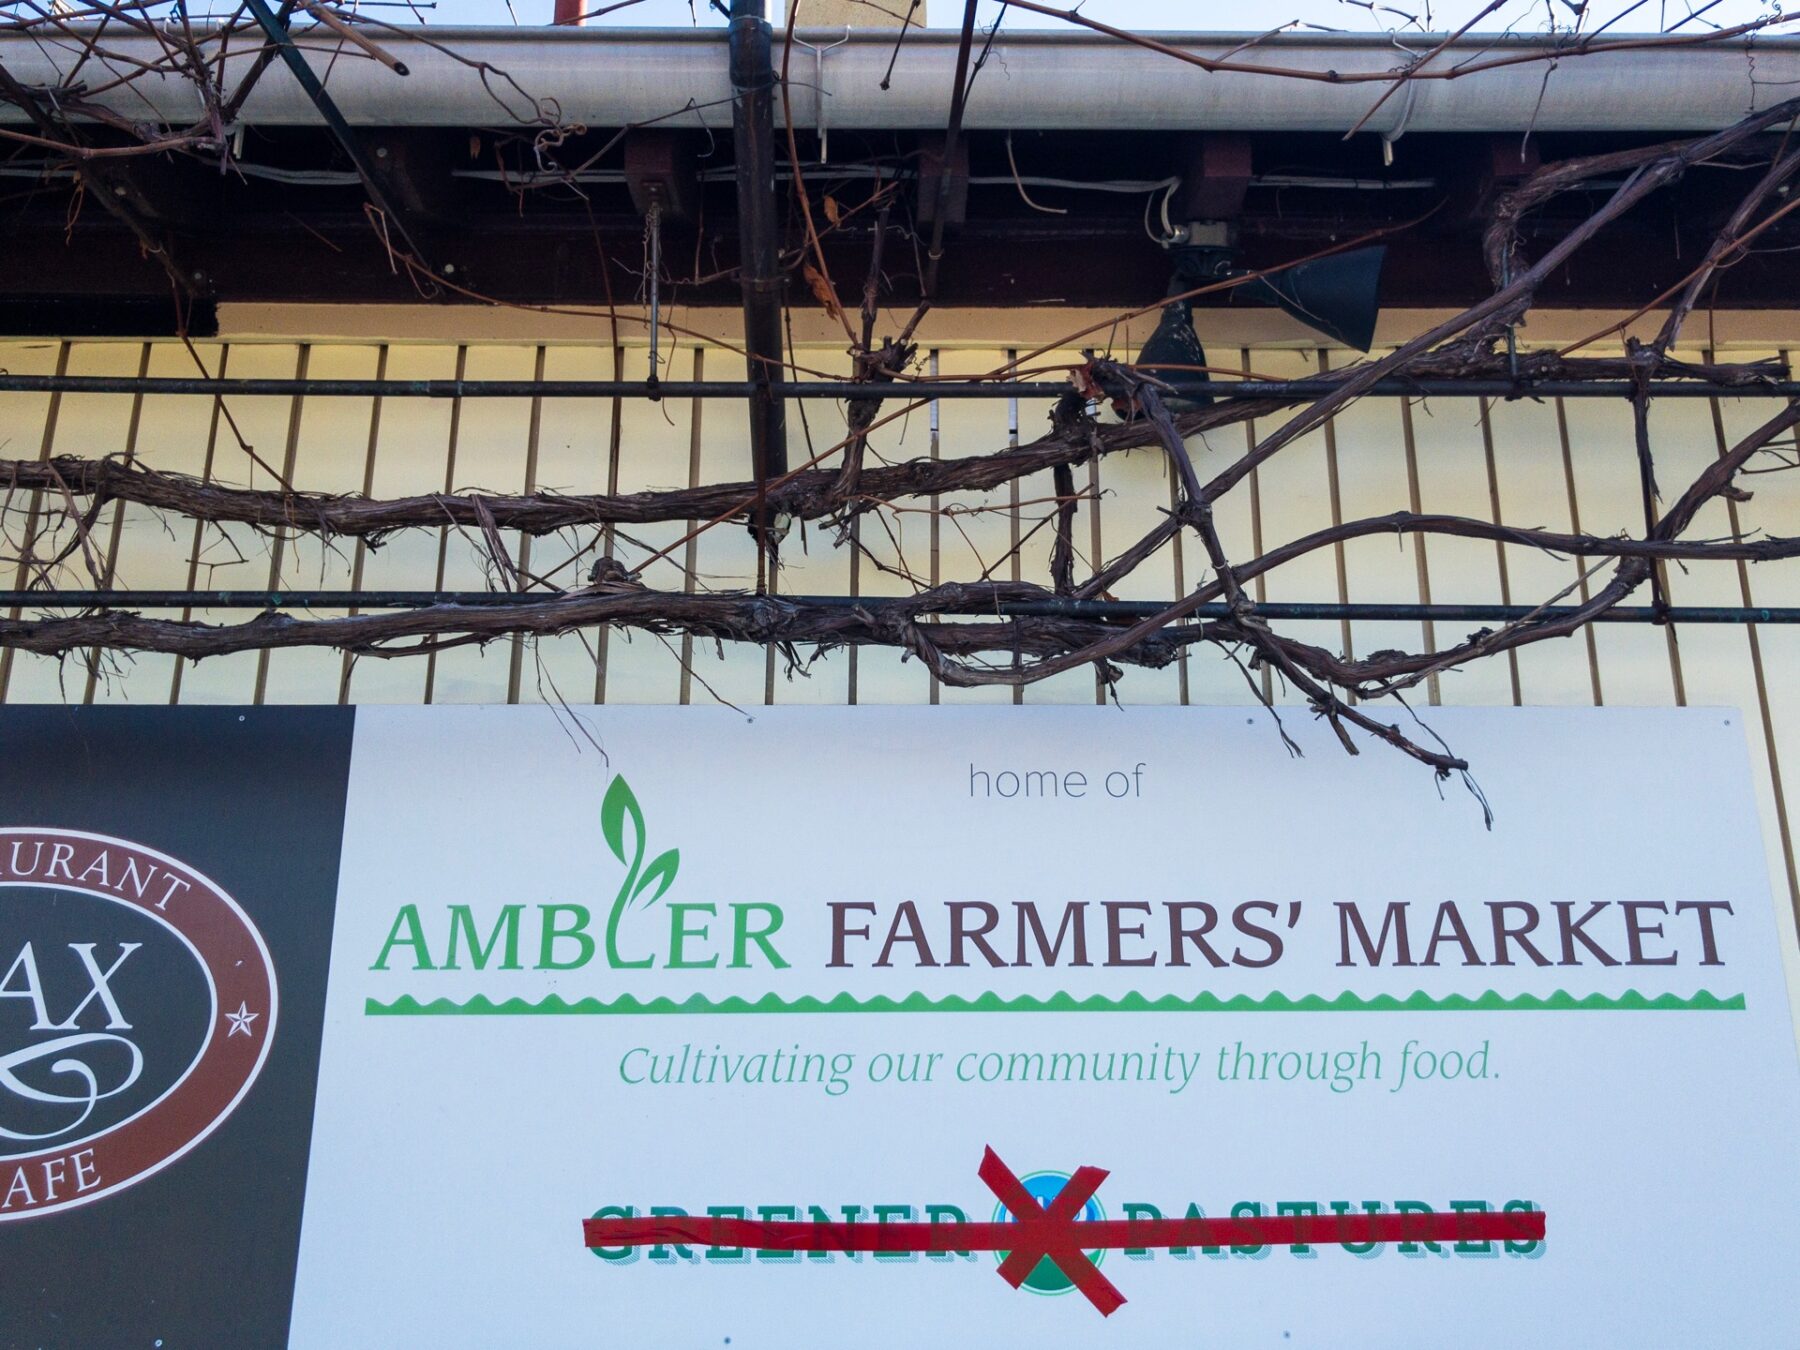 Checked in at Ambler Farmers Market